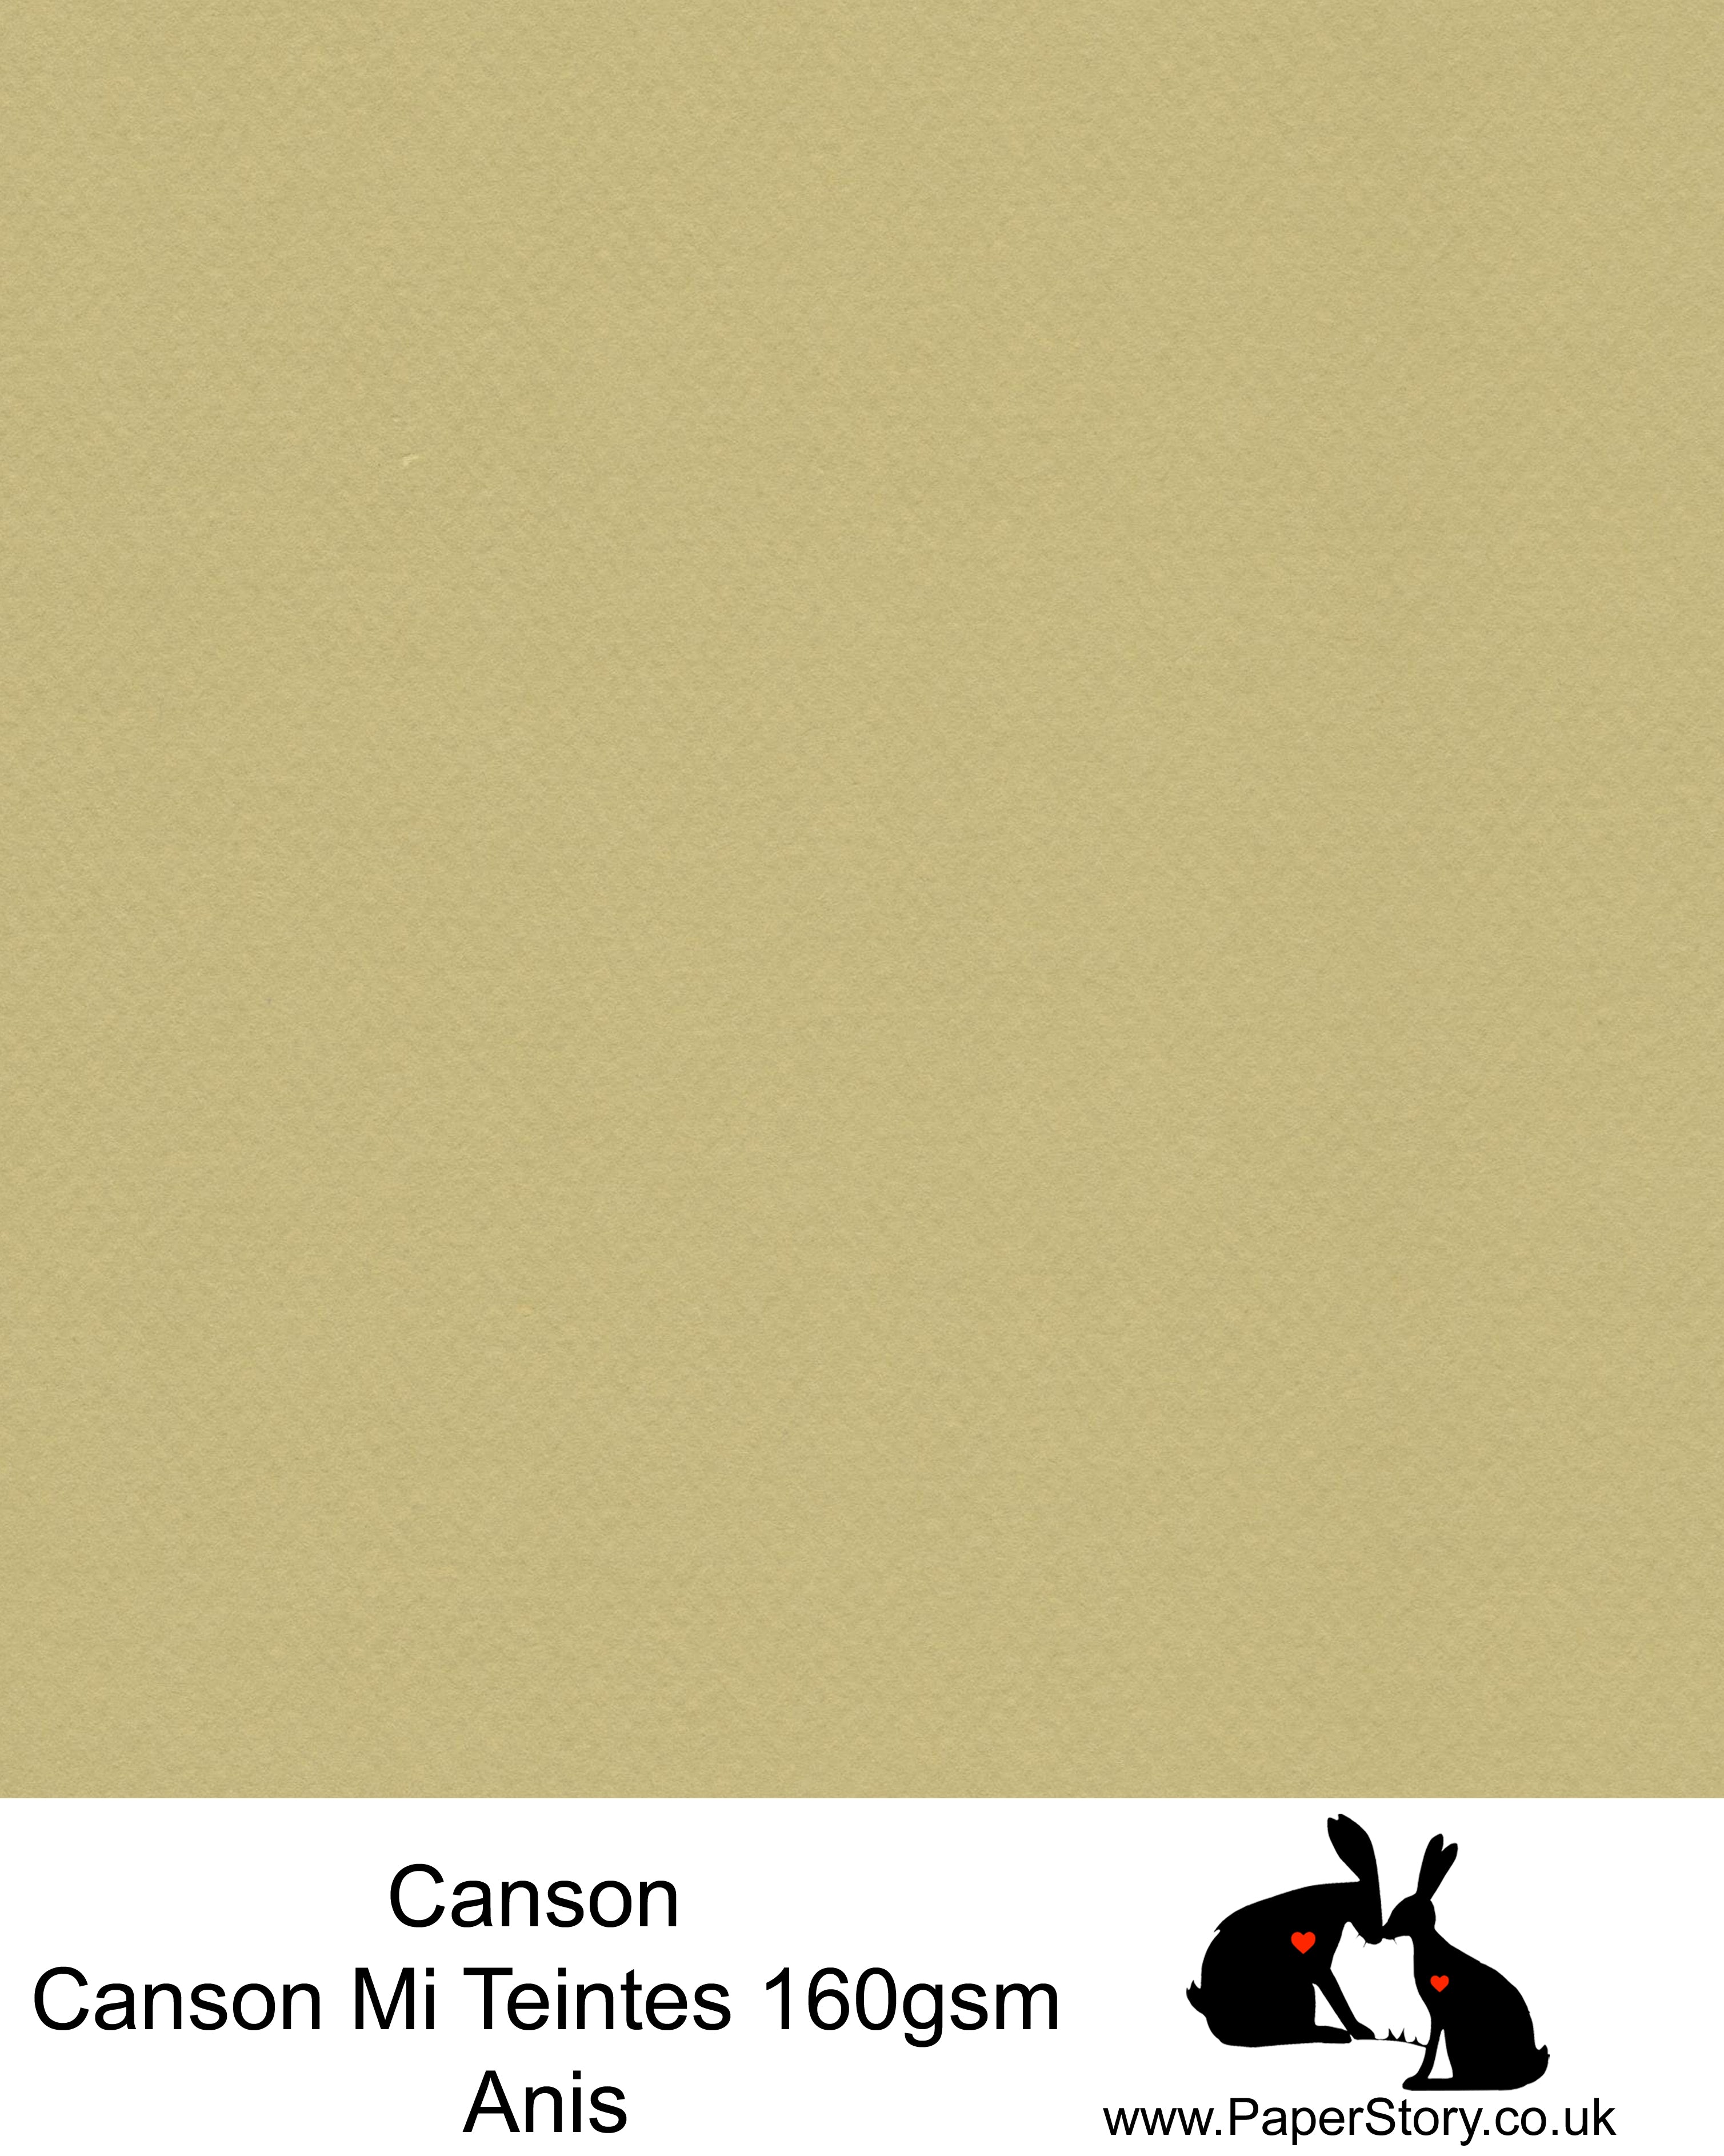 Canson Mi Teintes acid free, Anis pastel green, hammered texture honeycomb surface paper 160 gsm. This is a popular and classic paper for all artists especially well respected for Pastel  and Papercutting made famous by Paper Panda. This paper has a honeycombed finish one side and fine grain the other. An authentic art paper, acid free with a  very high 50% cotton content. Canson Mi-Teintes complies with the ISO 9706 standard on permanence, a guarantee of excellent conservation  